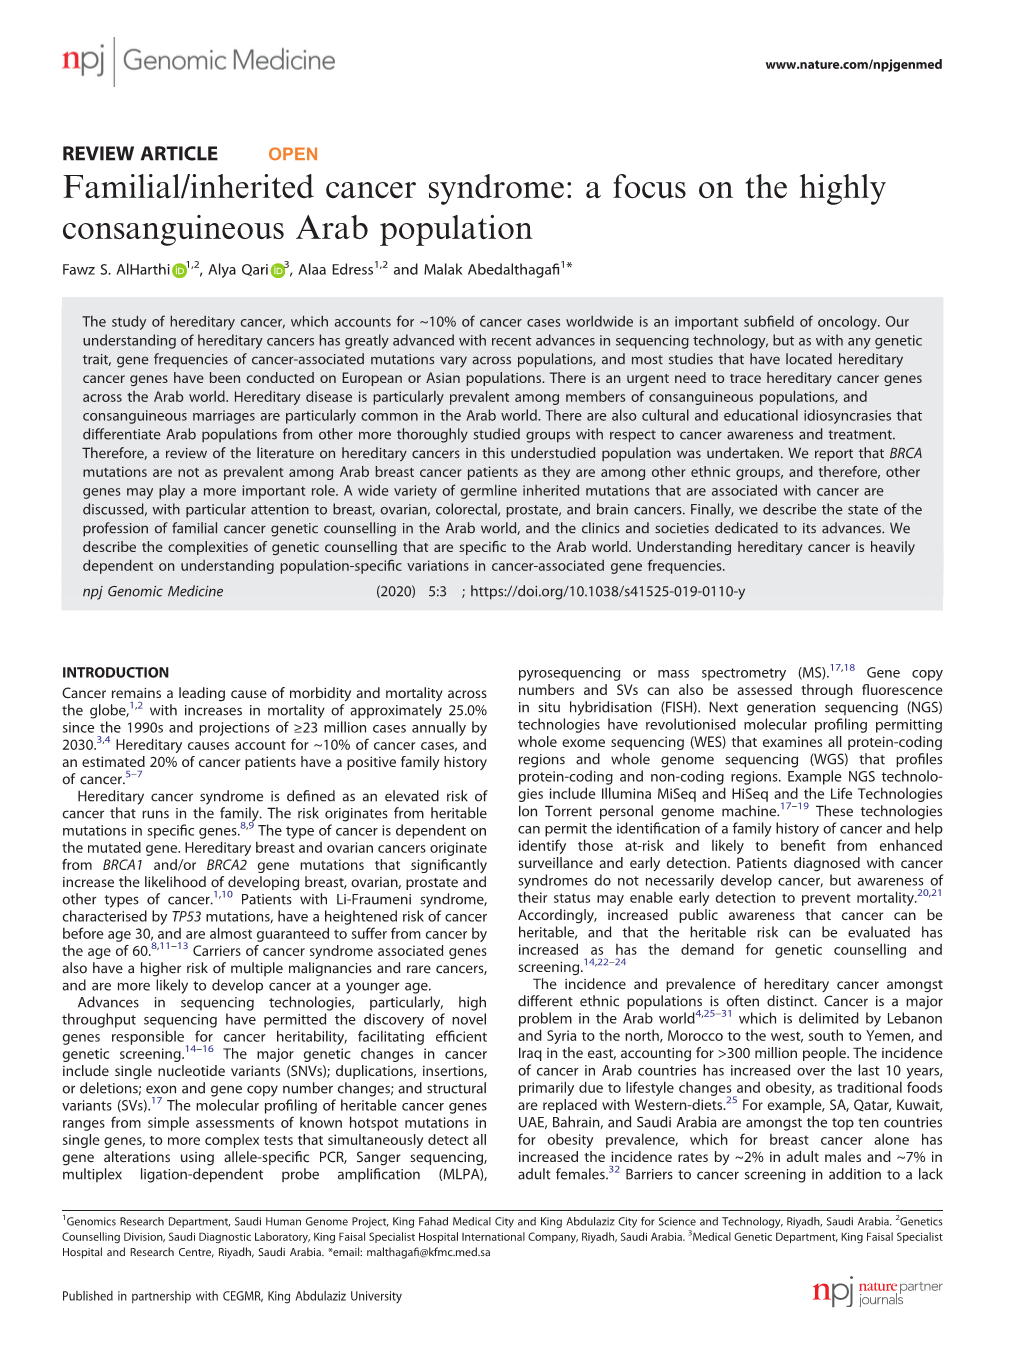 Familial/Inherited Cancer Syndrome: a Focus on the Highly Consanguineous Arab Population